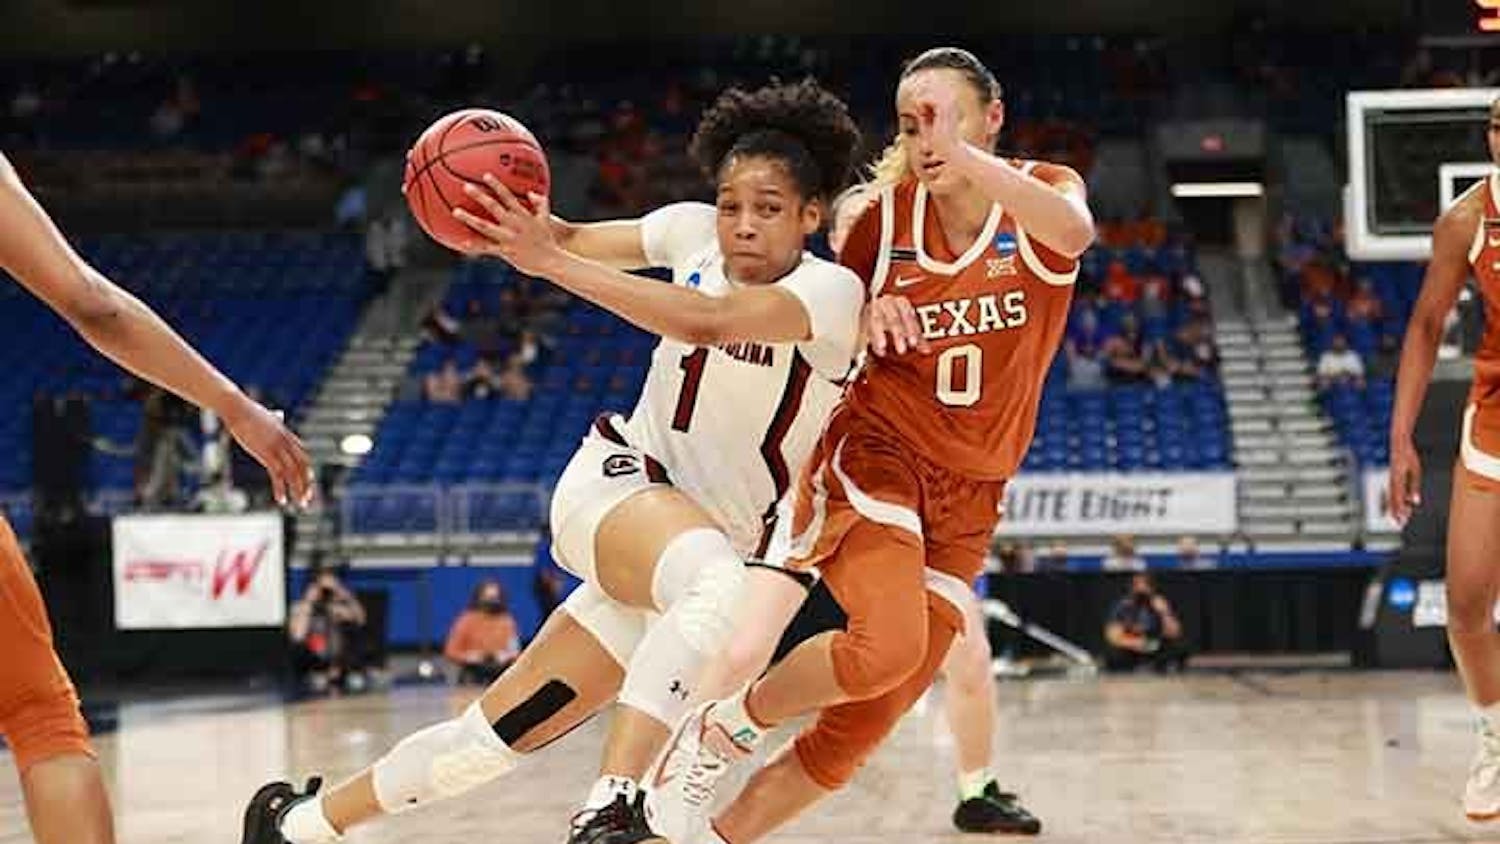 Sophomore guard Zia Cooke runs and dribbles between two Longhorn players. The Gamecocks beat the Longhorns 62-34, letting them advance to the Final Four.